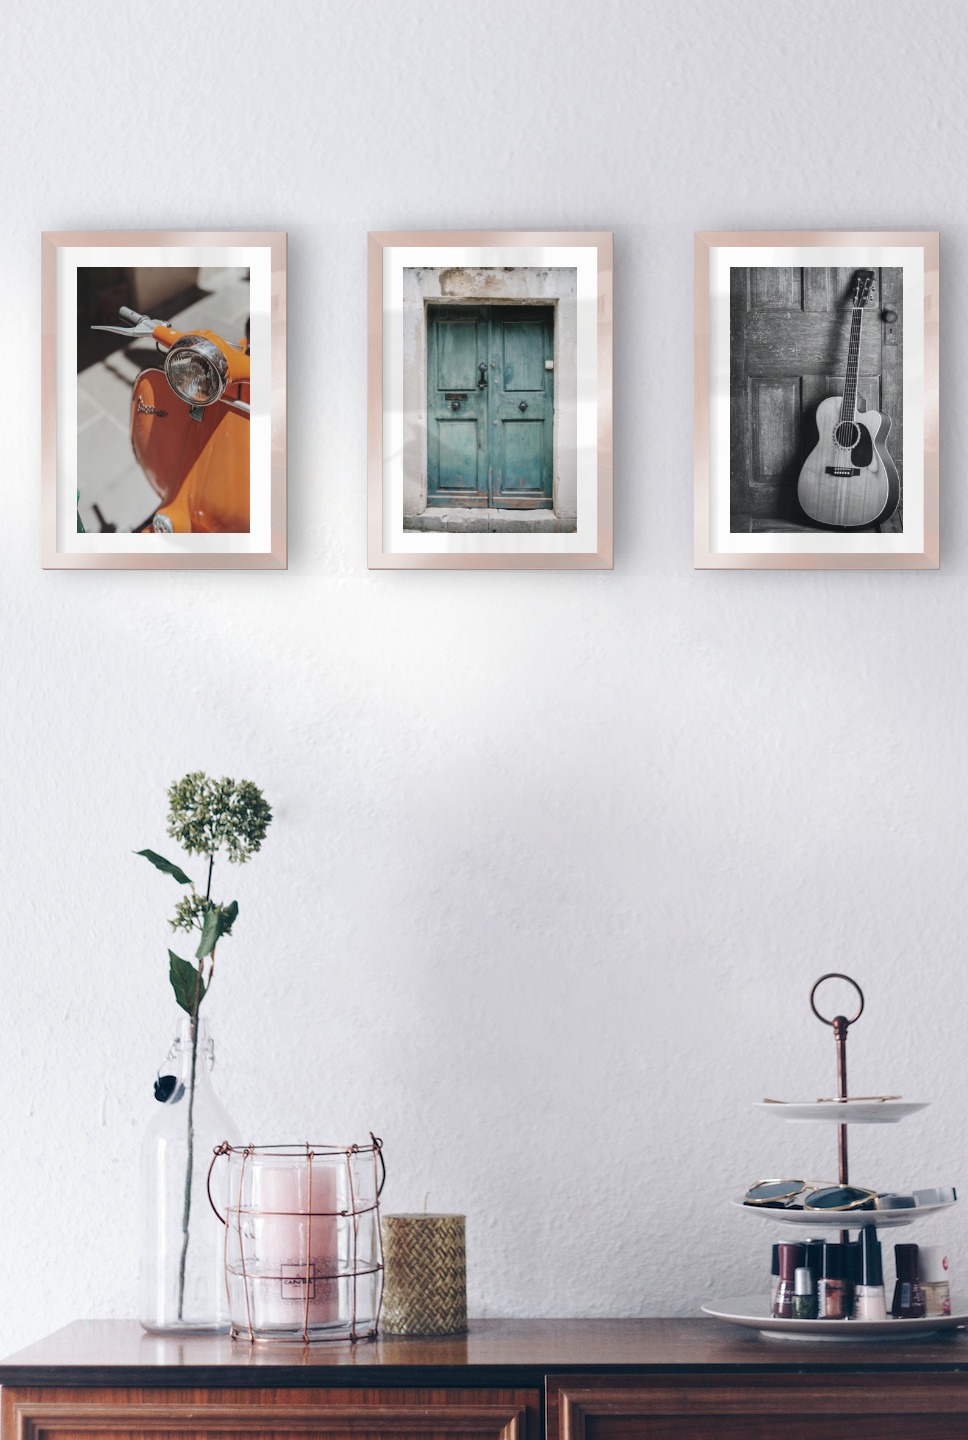 Gallery wall with picture frames in copper in sizes 21x30 with prints "Orange vespa", "Door" and "Guitar"